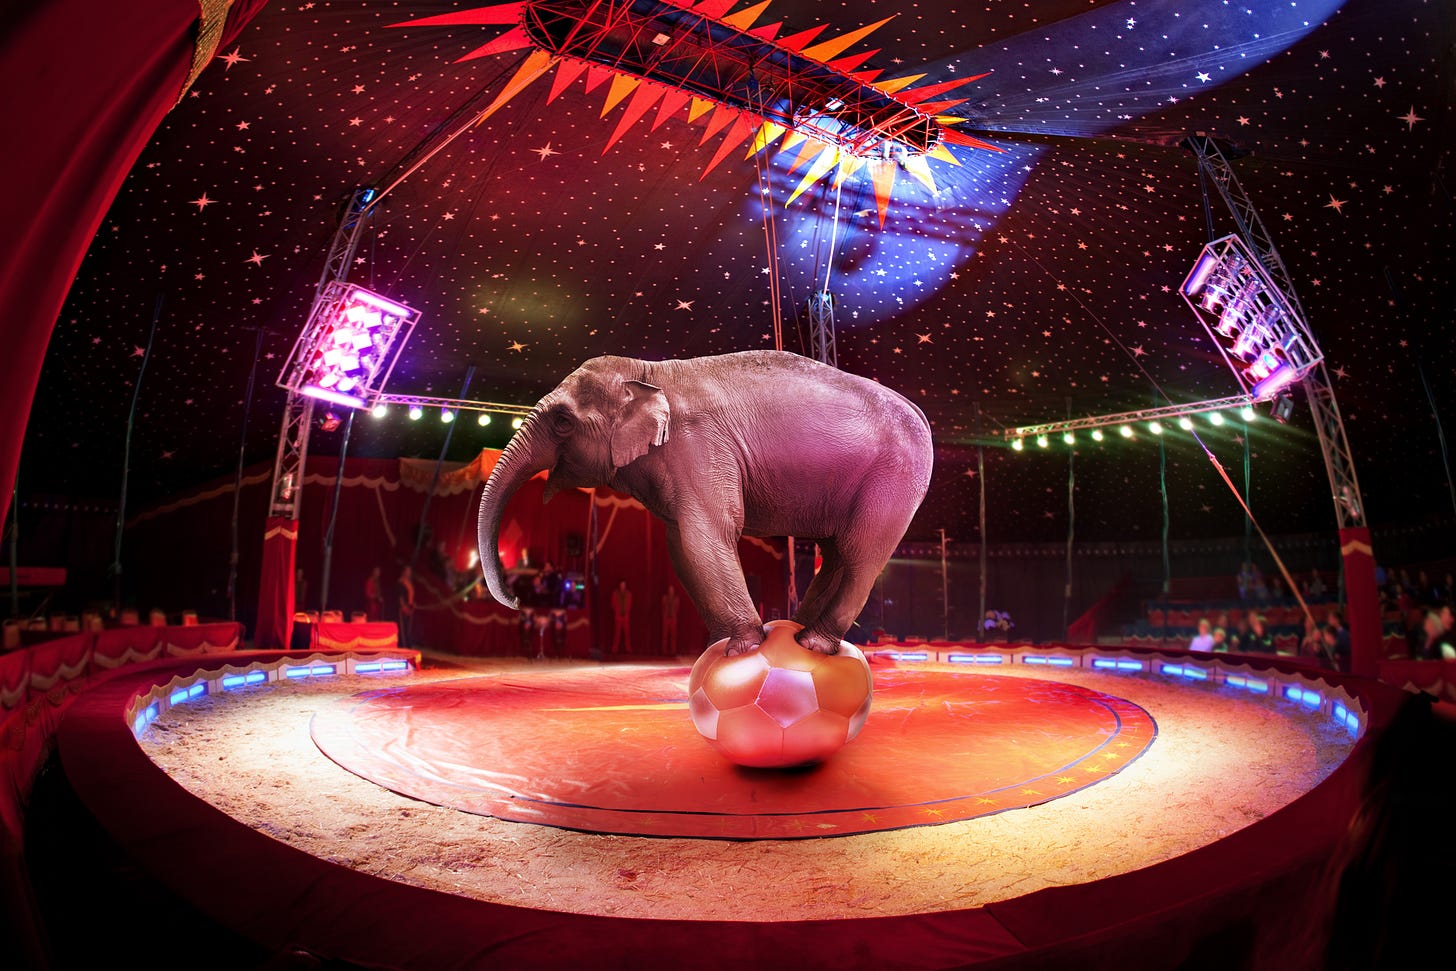 A circus elephant balancing on a ball. I'm aware that circuses are not generally great for animals, but the image has a double entendre for the story